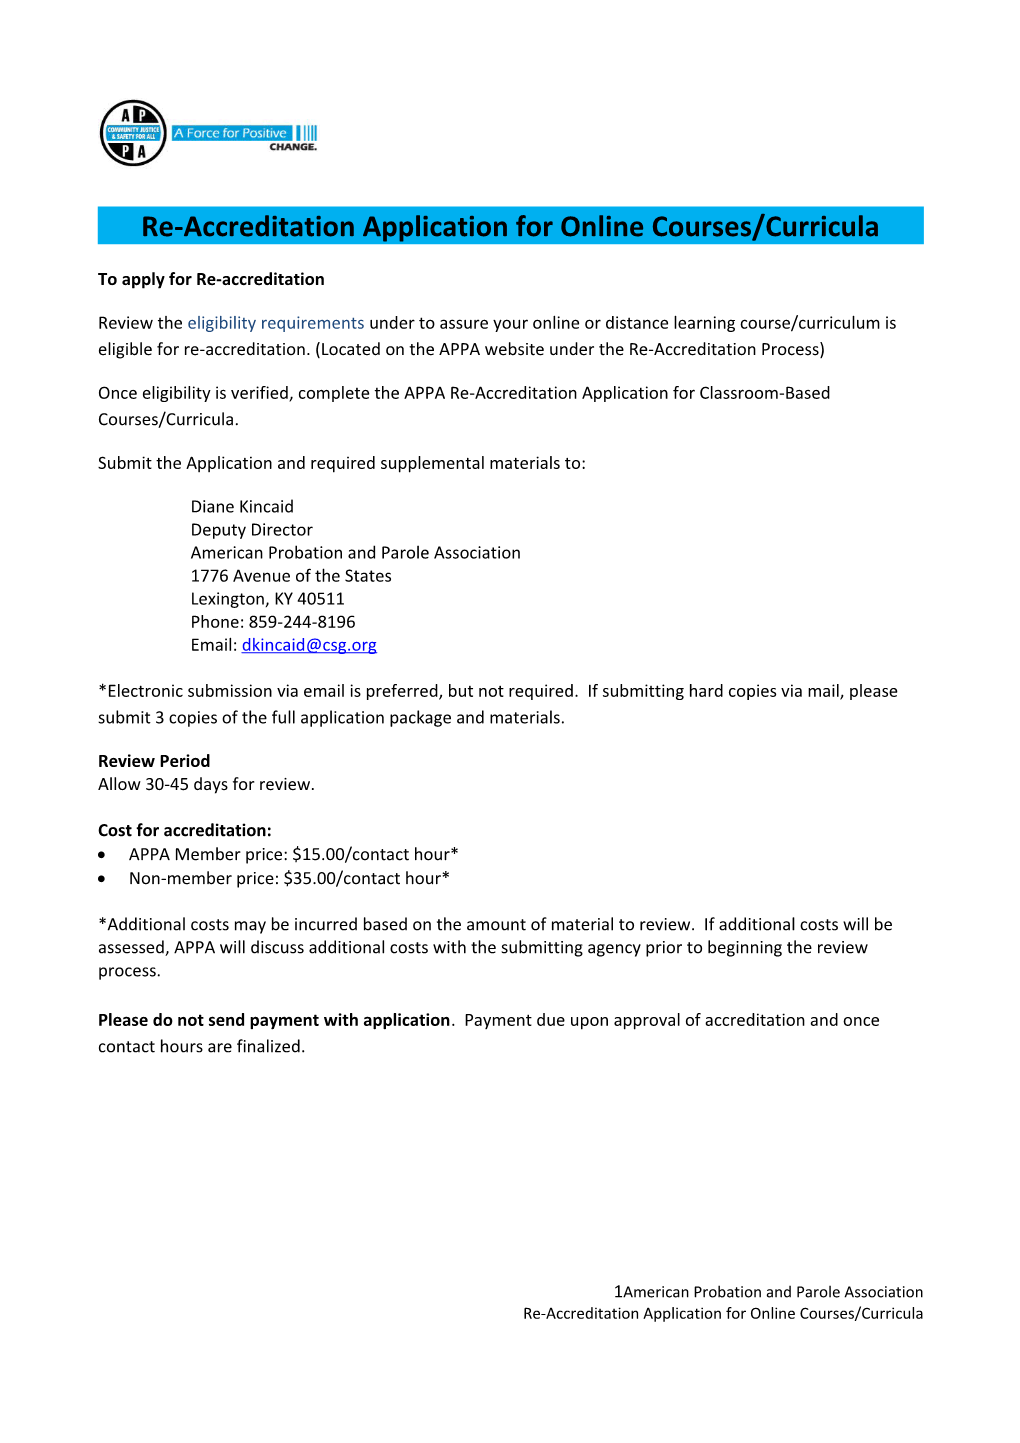 Re-Accreditation Application for Online Courses/Curricula